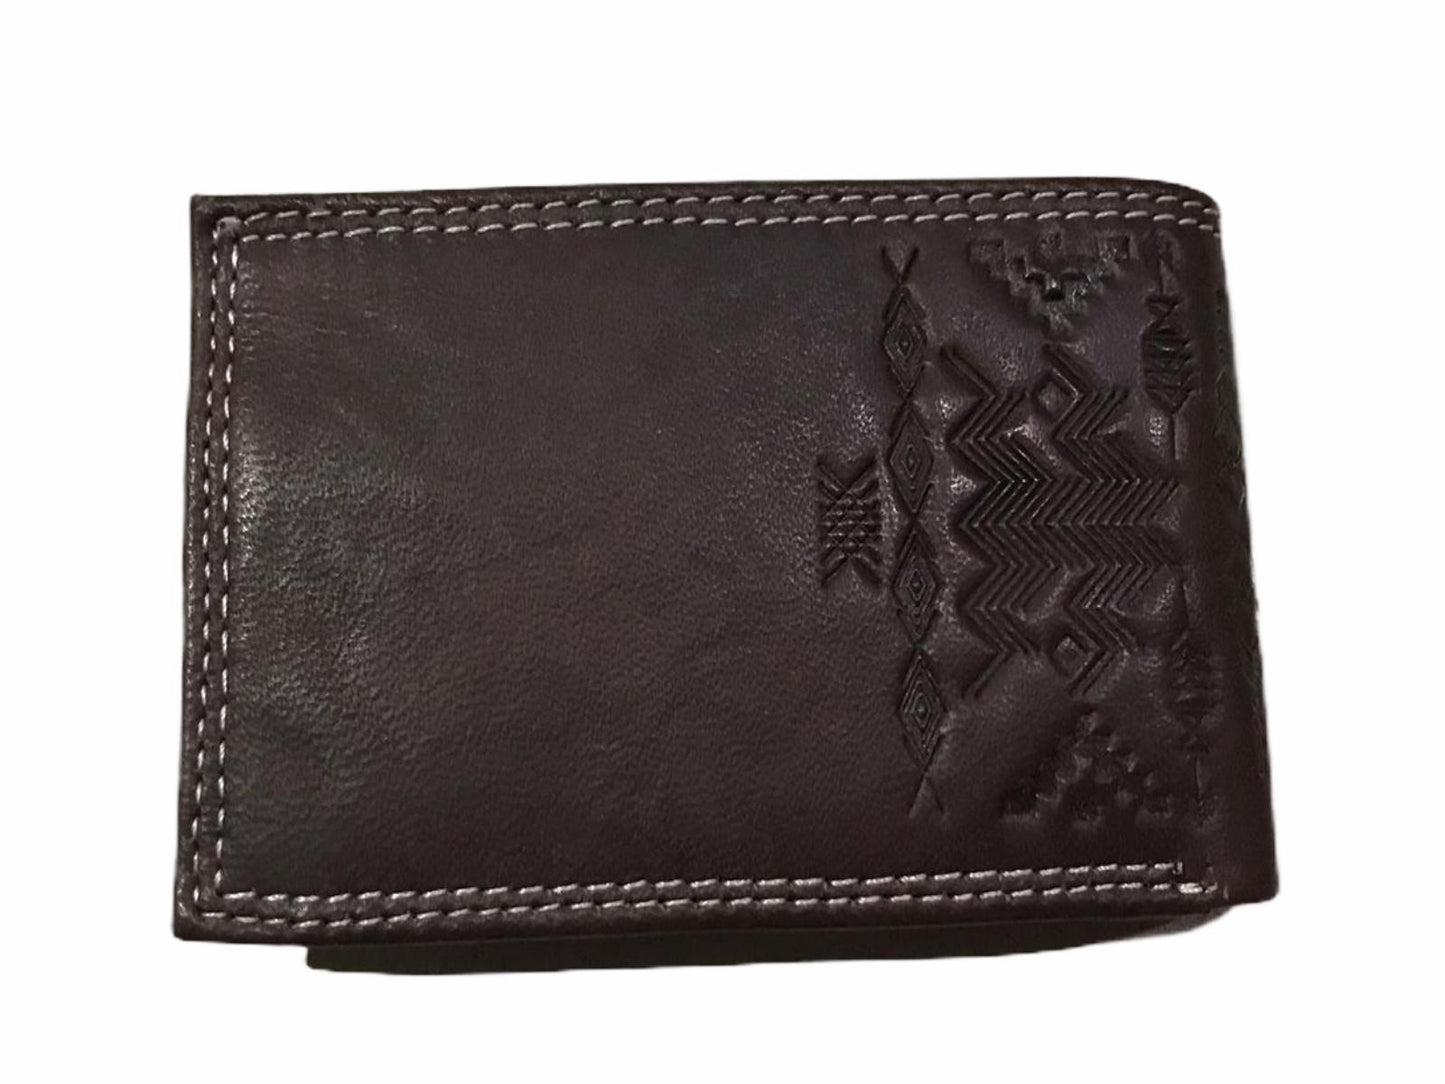 gs | Card holder, wallet and purse 212702